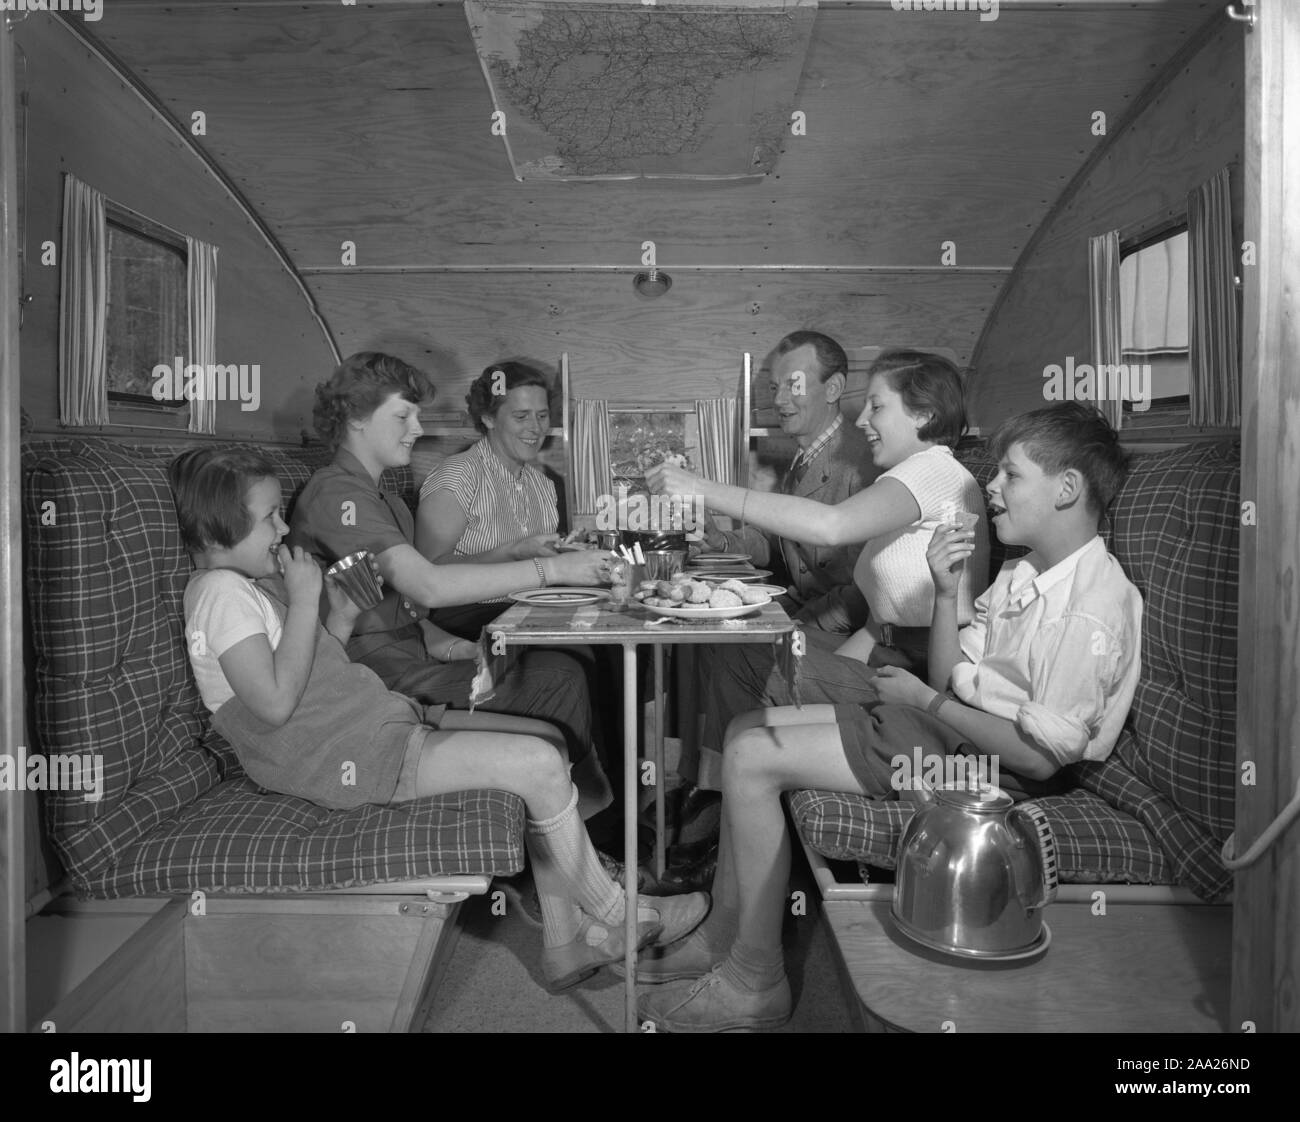 1950s camping. A family is enjoying their holiday and the practial camping life in their caravan. Demonstrating how well everything works for them even on holiday. The family of six people fits easily around the table. Sweden 1952 Ref 2021 Stock Photo